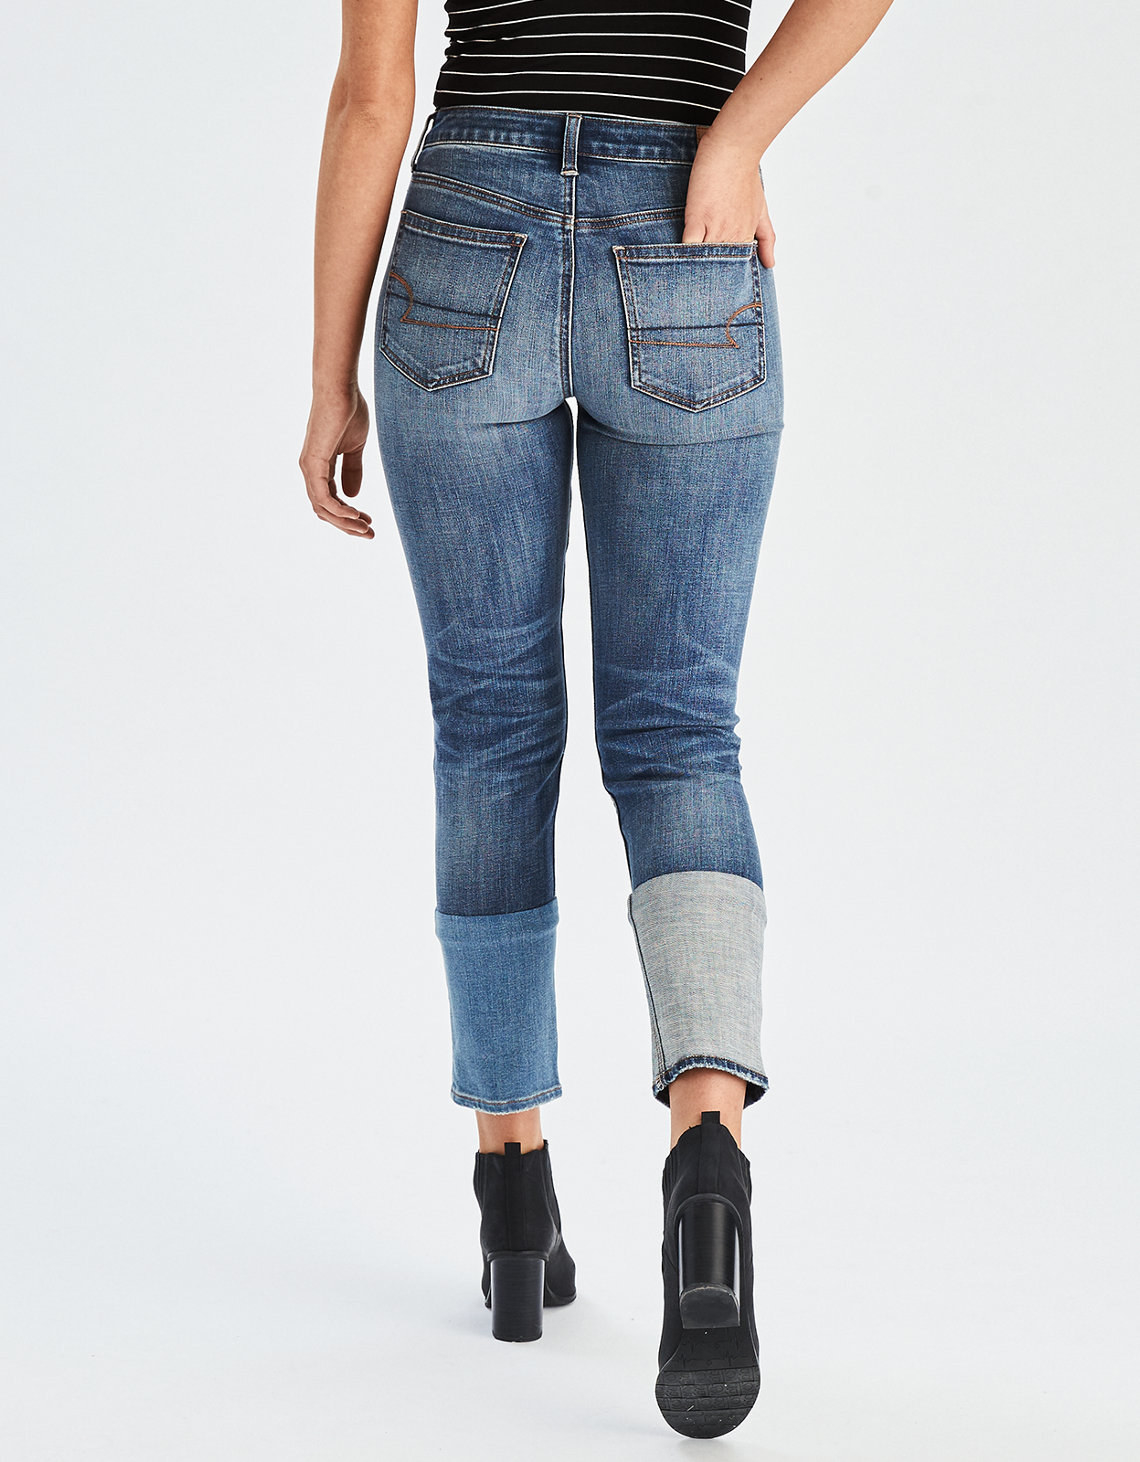 inexpensive jeans online